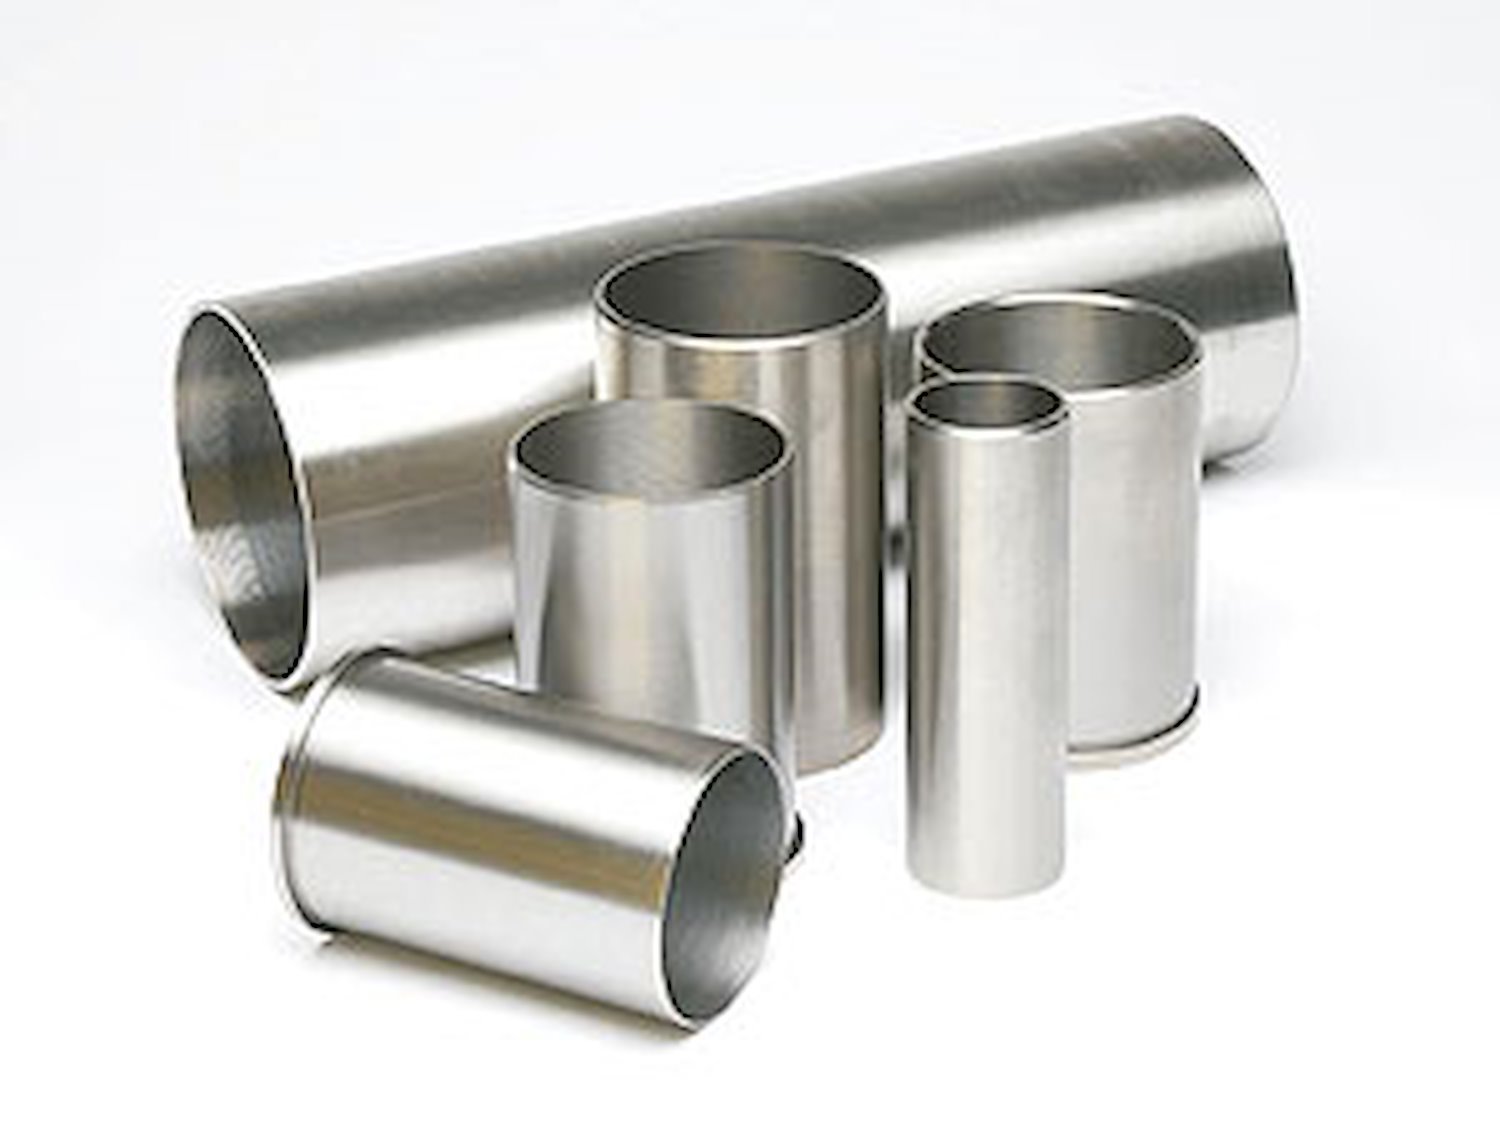 Cylinder Sleeve Bore: 2.6770" Length: 5-3/4" Wall Thickness: 1/8"